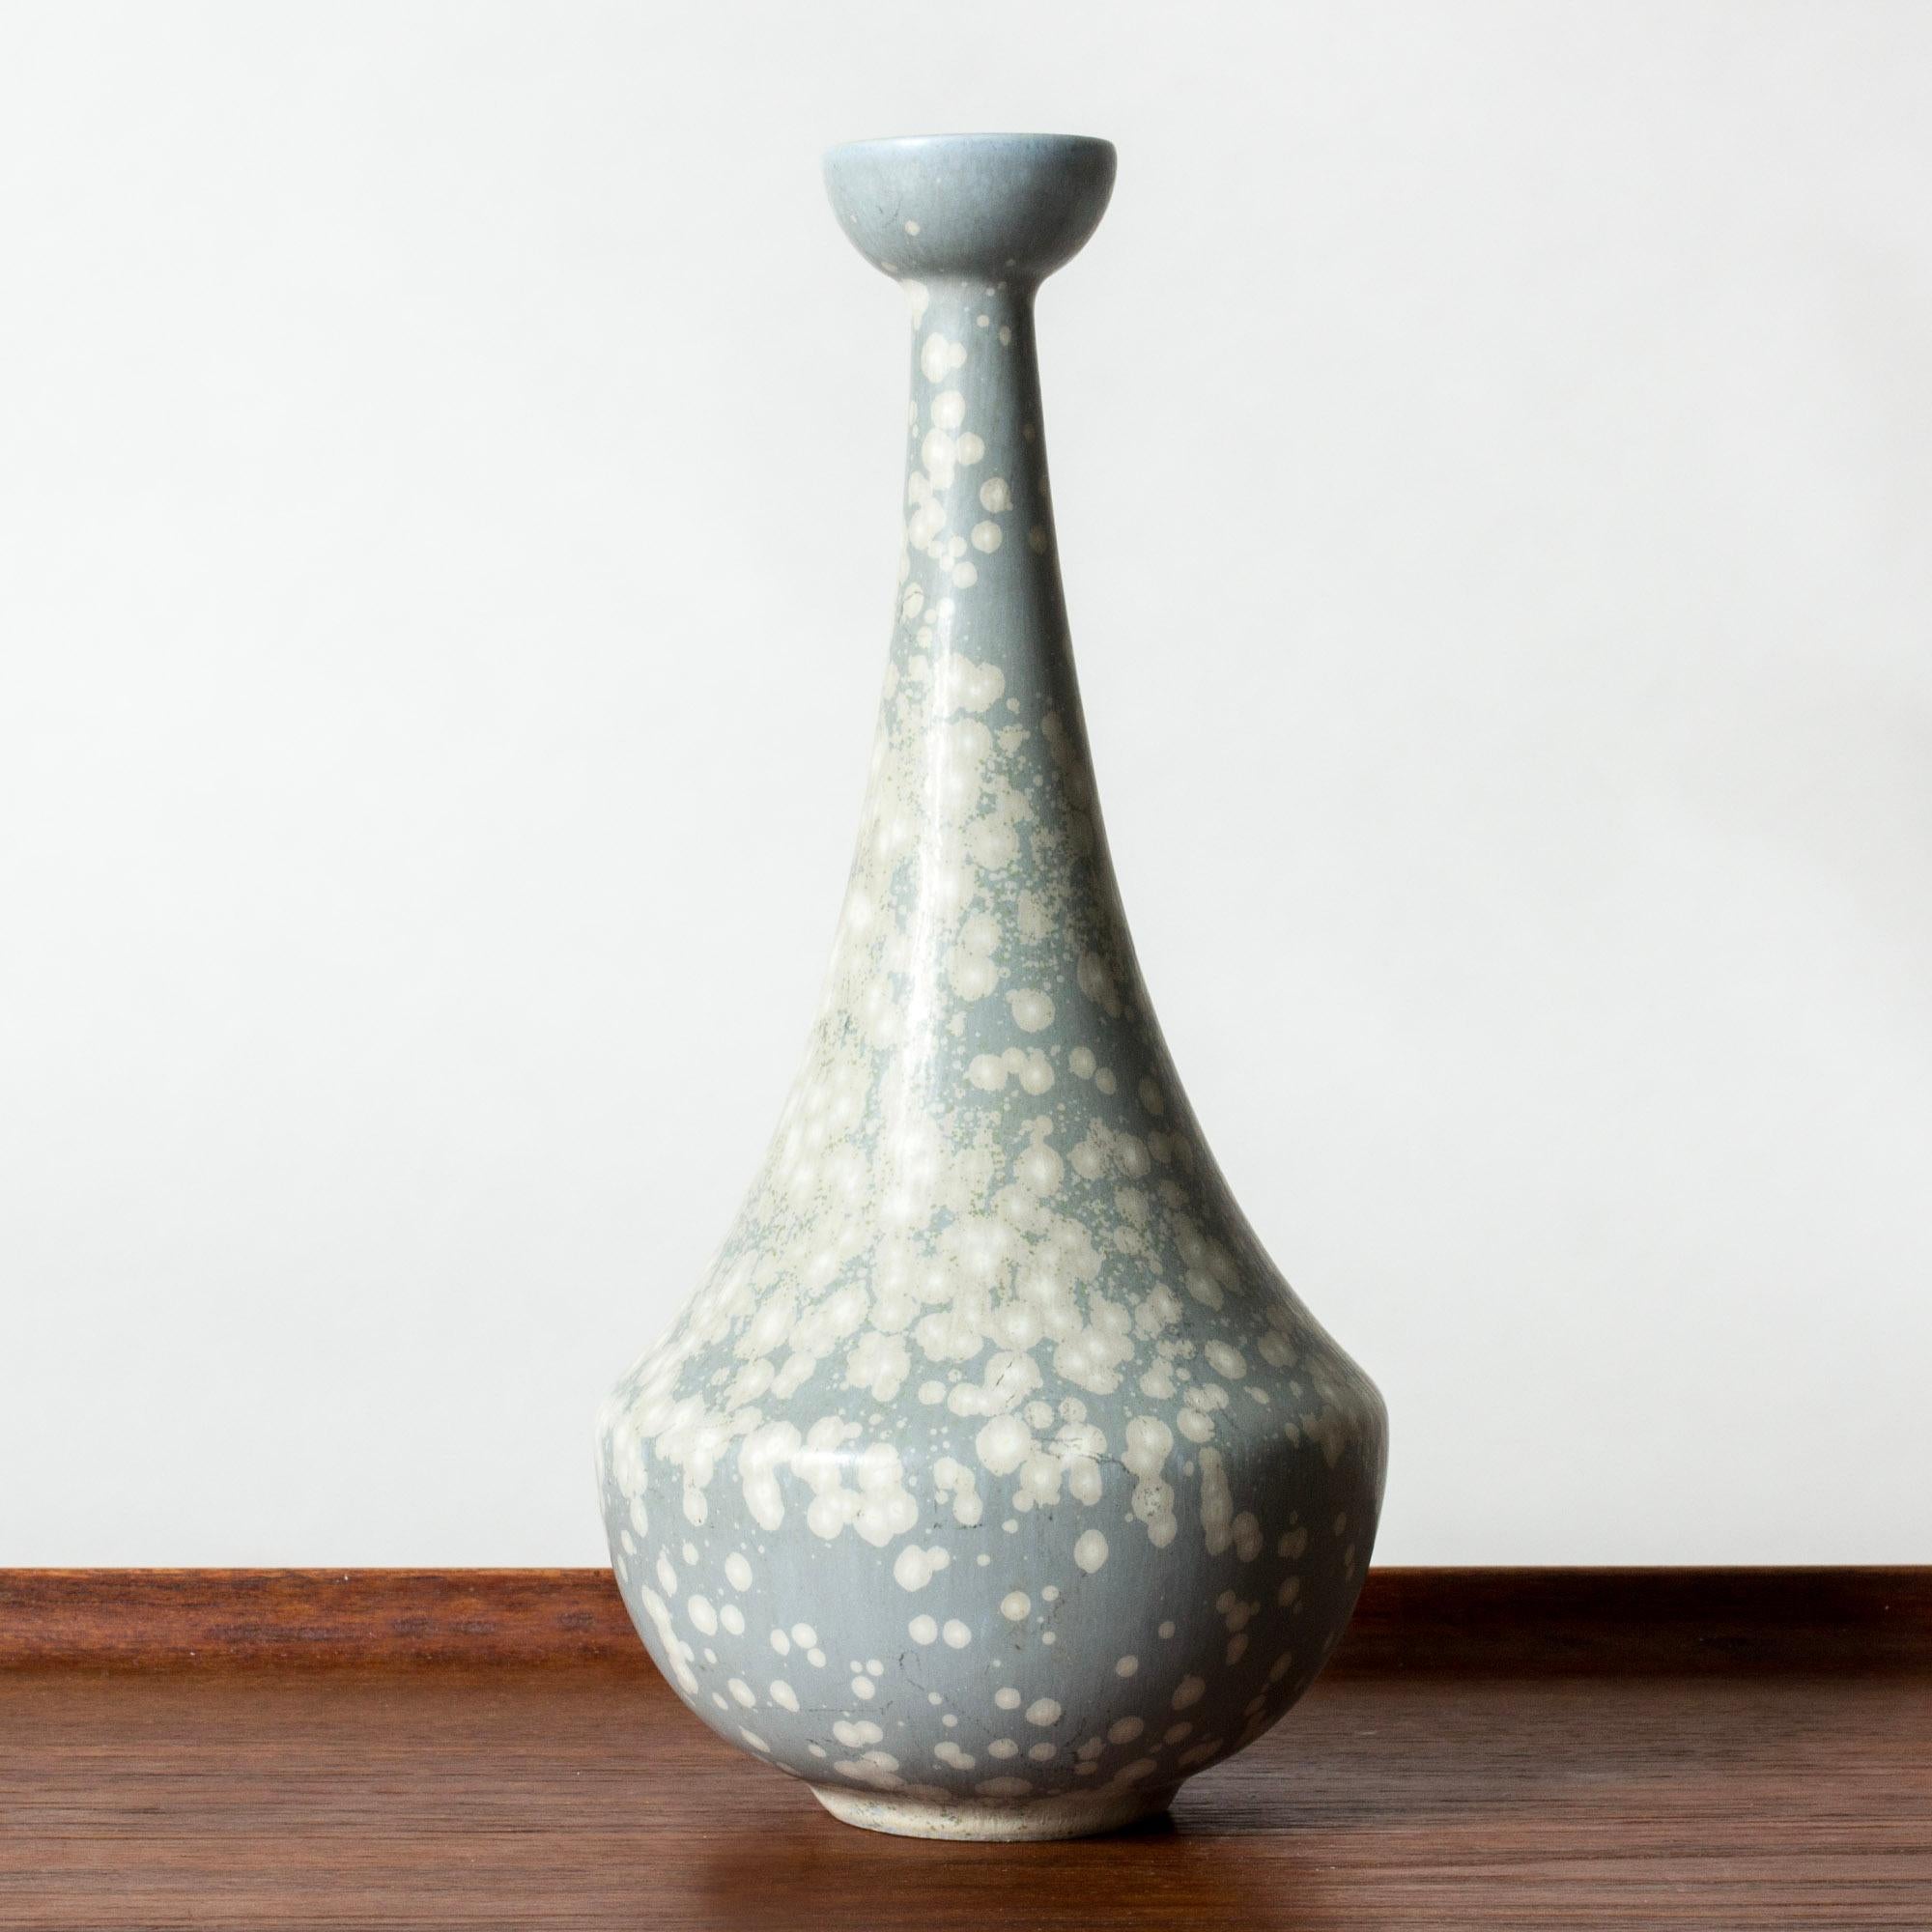 Lovely stoneware vase by Gunnar Nylund, in a curvesome, tapering form. Glazed pale blue with a white “Mimosa” pattern.

Gunnar Nylund was one of the most influential ceramicists and designers of the Swedish mid-century period. He was Rörstrand’s